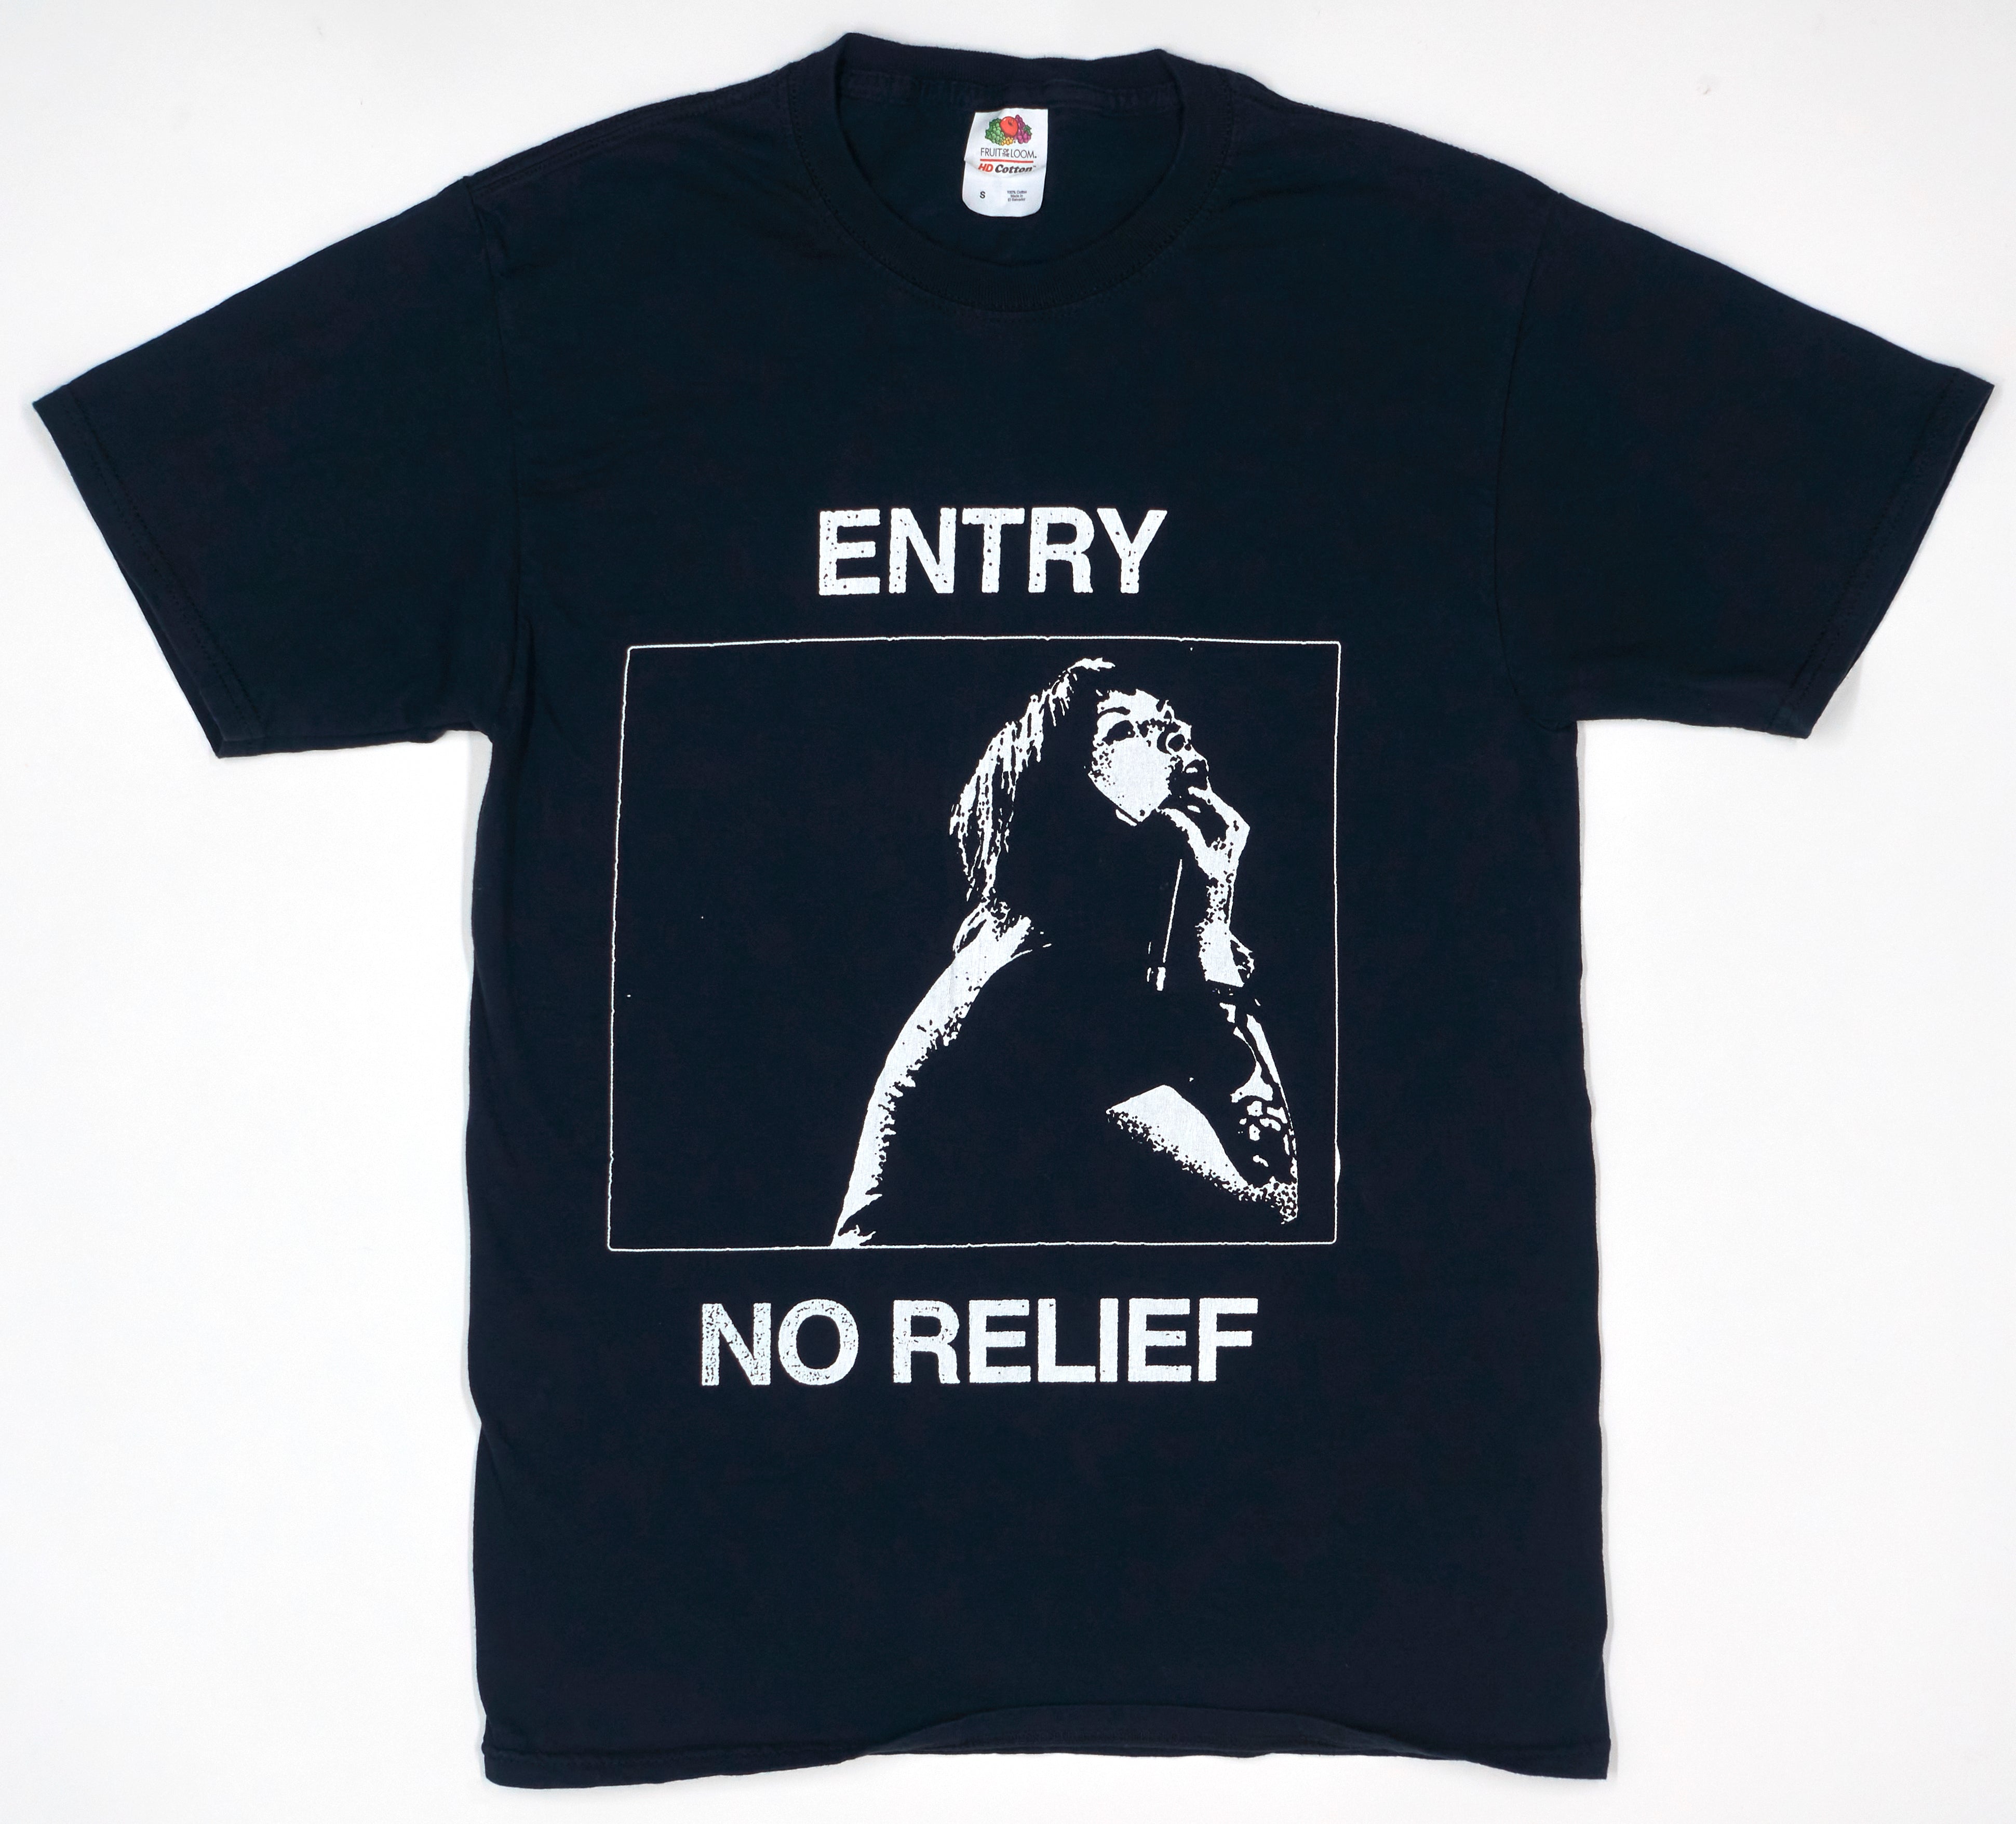 Entry – No Relief 2017 Tour Shirt Size Small